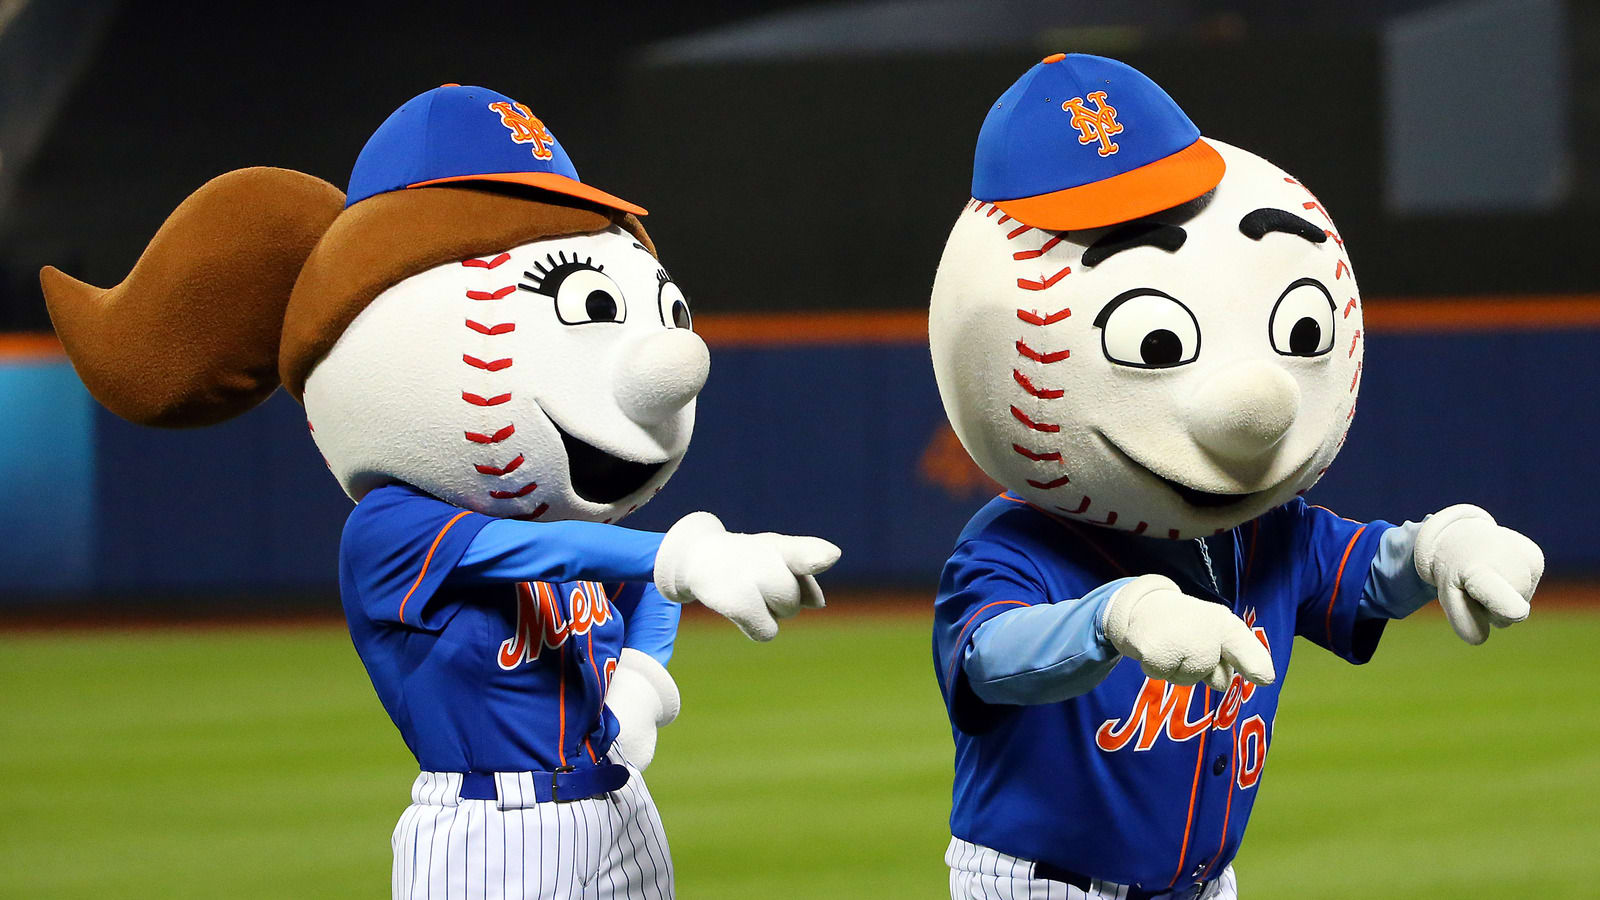 Mets issue statement in response to mascot flipping off fan